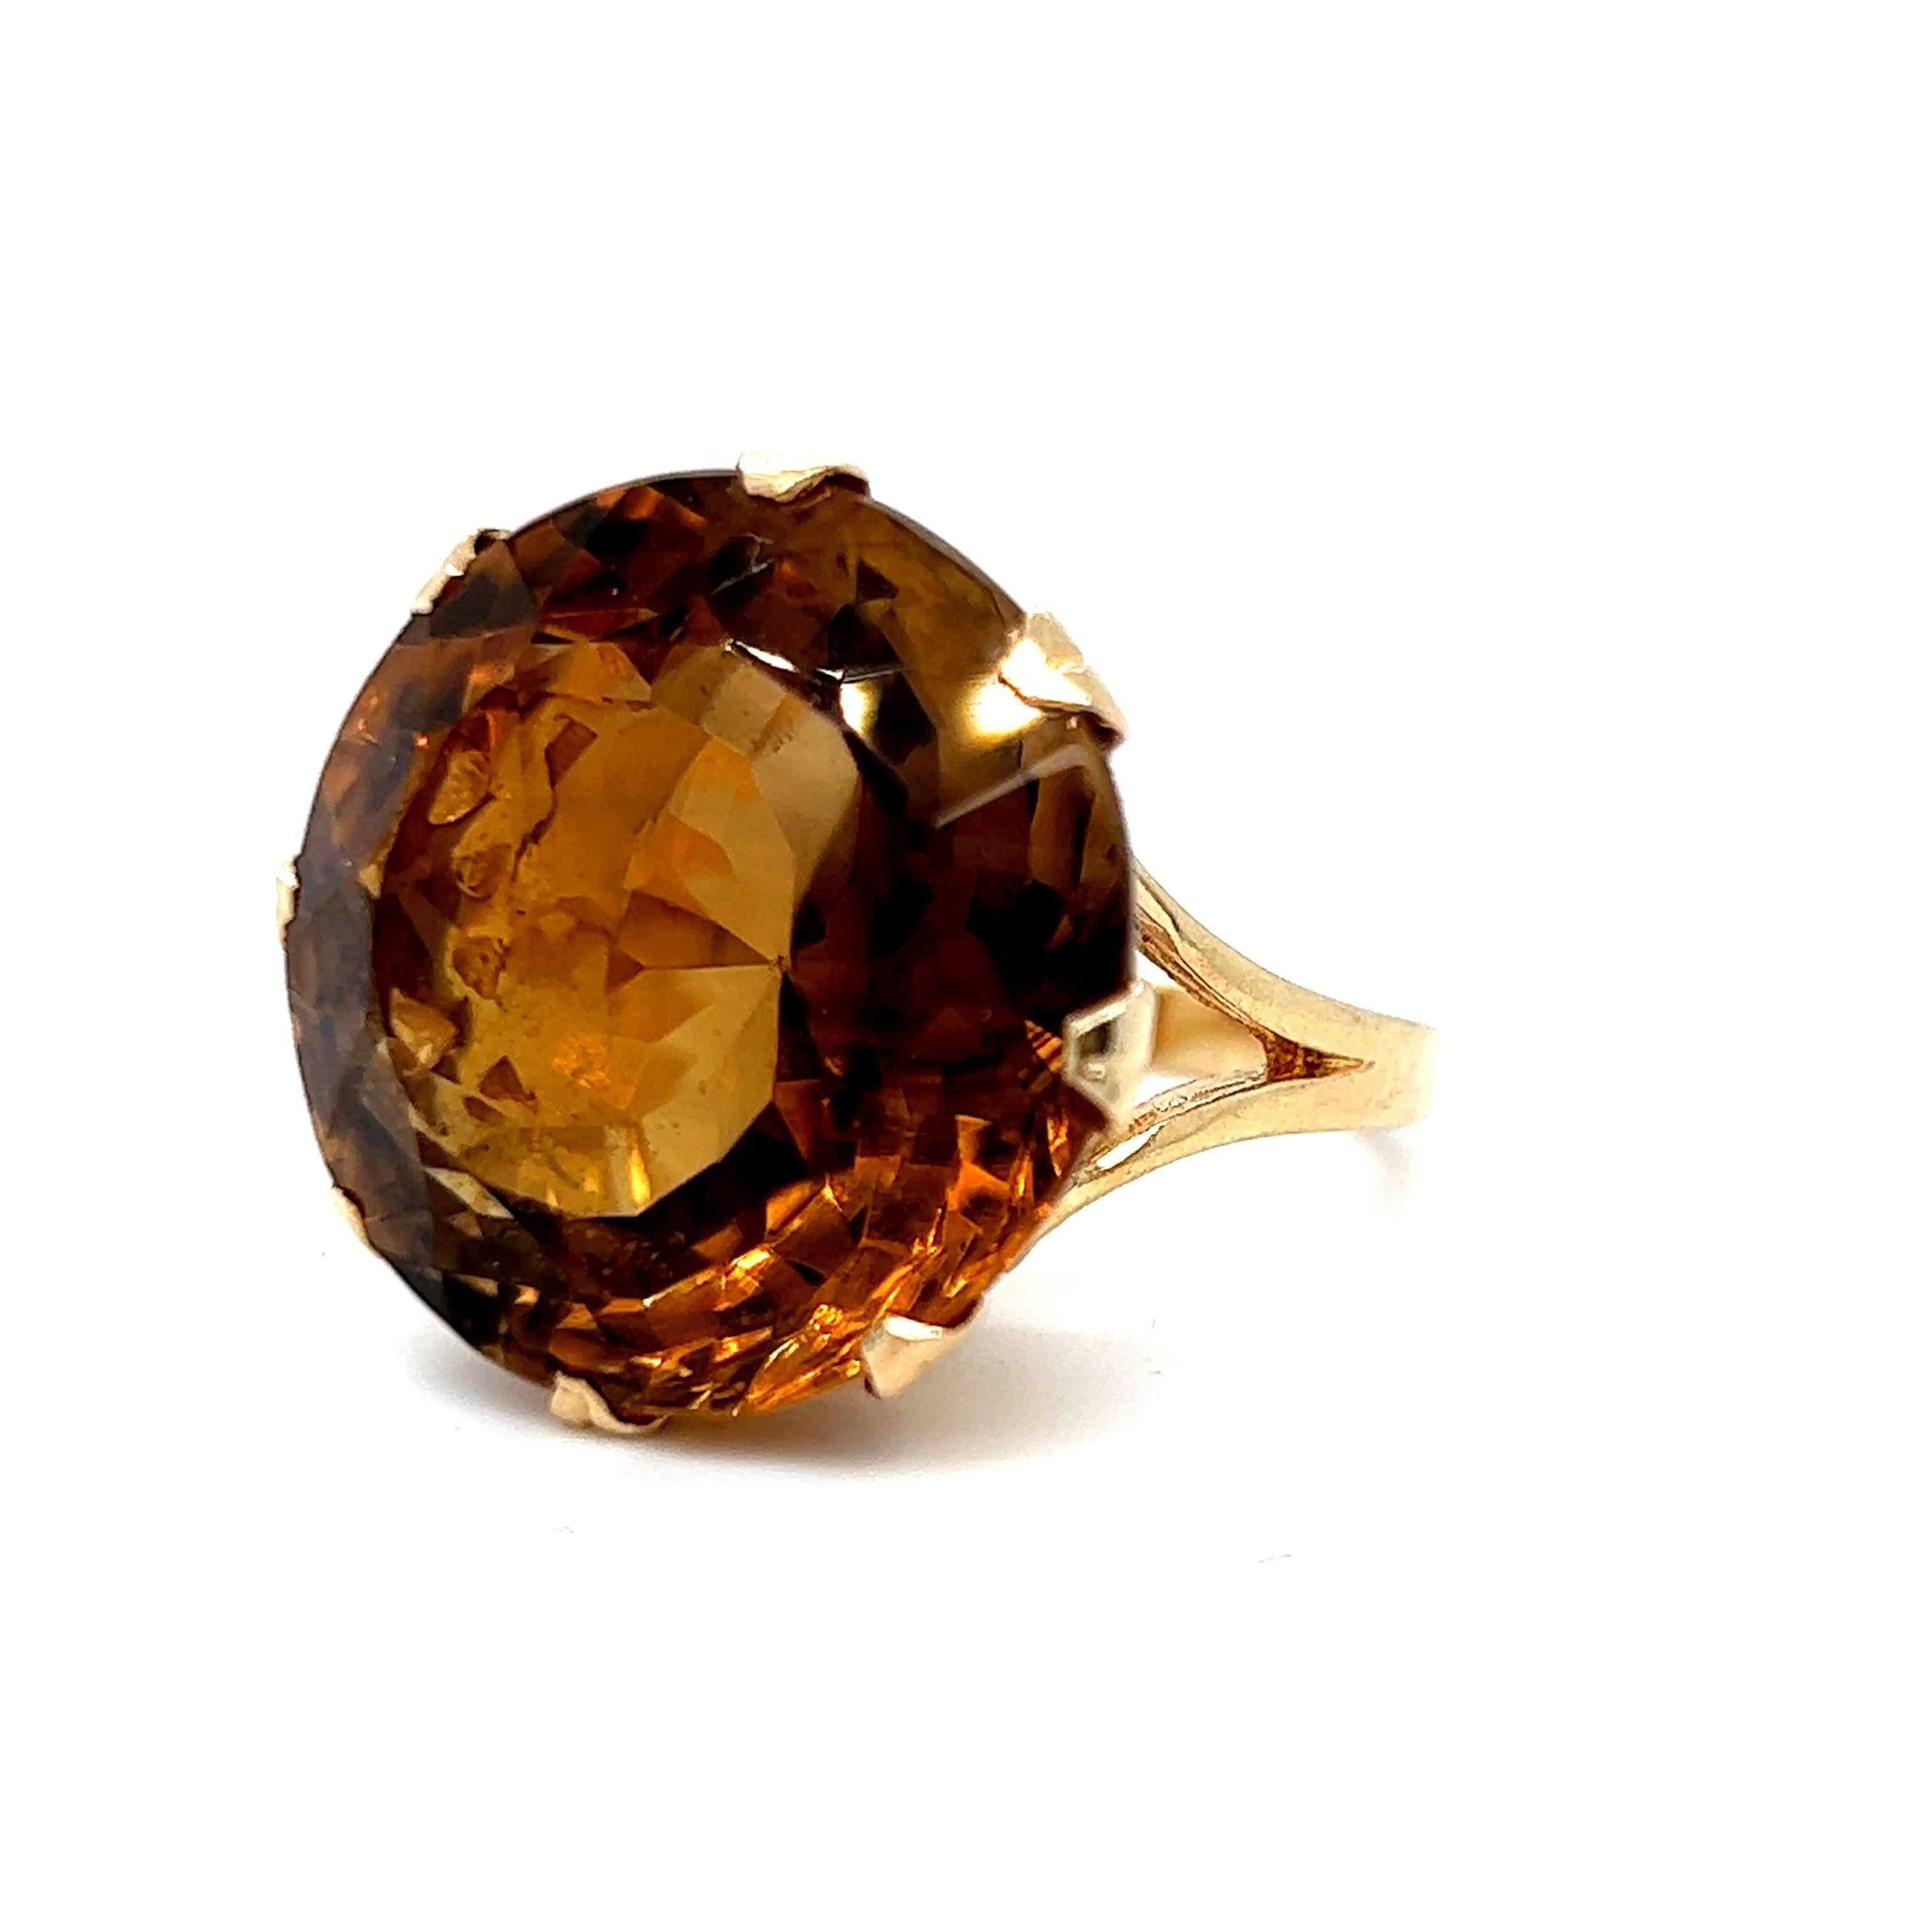 Modernist Vintage Citrine Solitaire Ring in 14K Yellow Gold